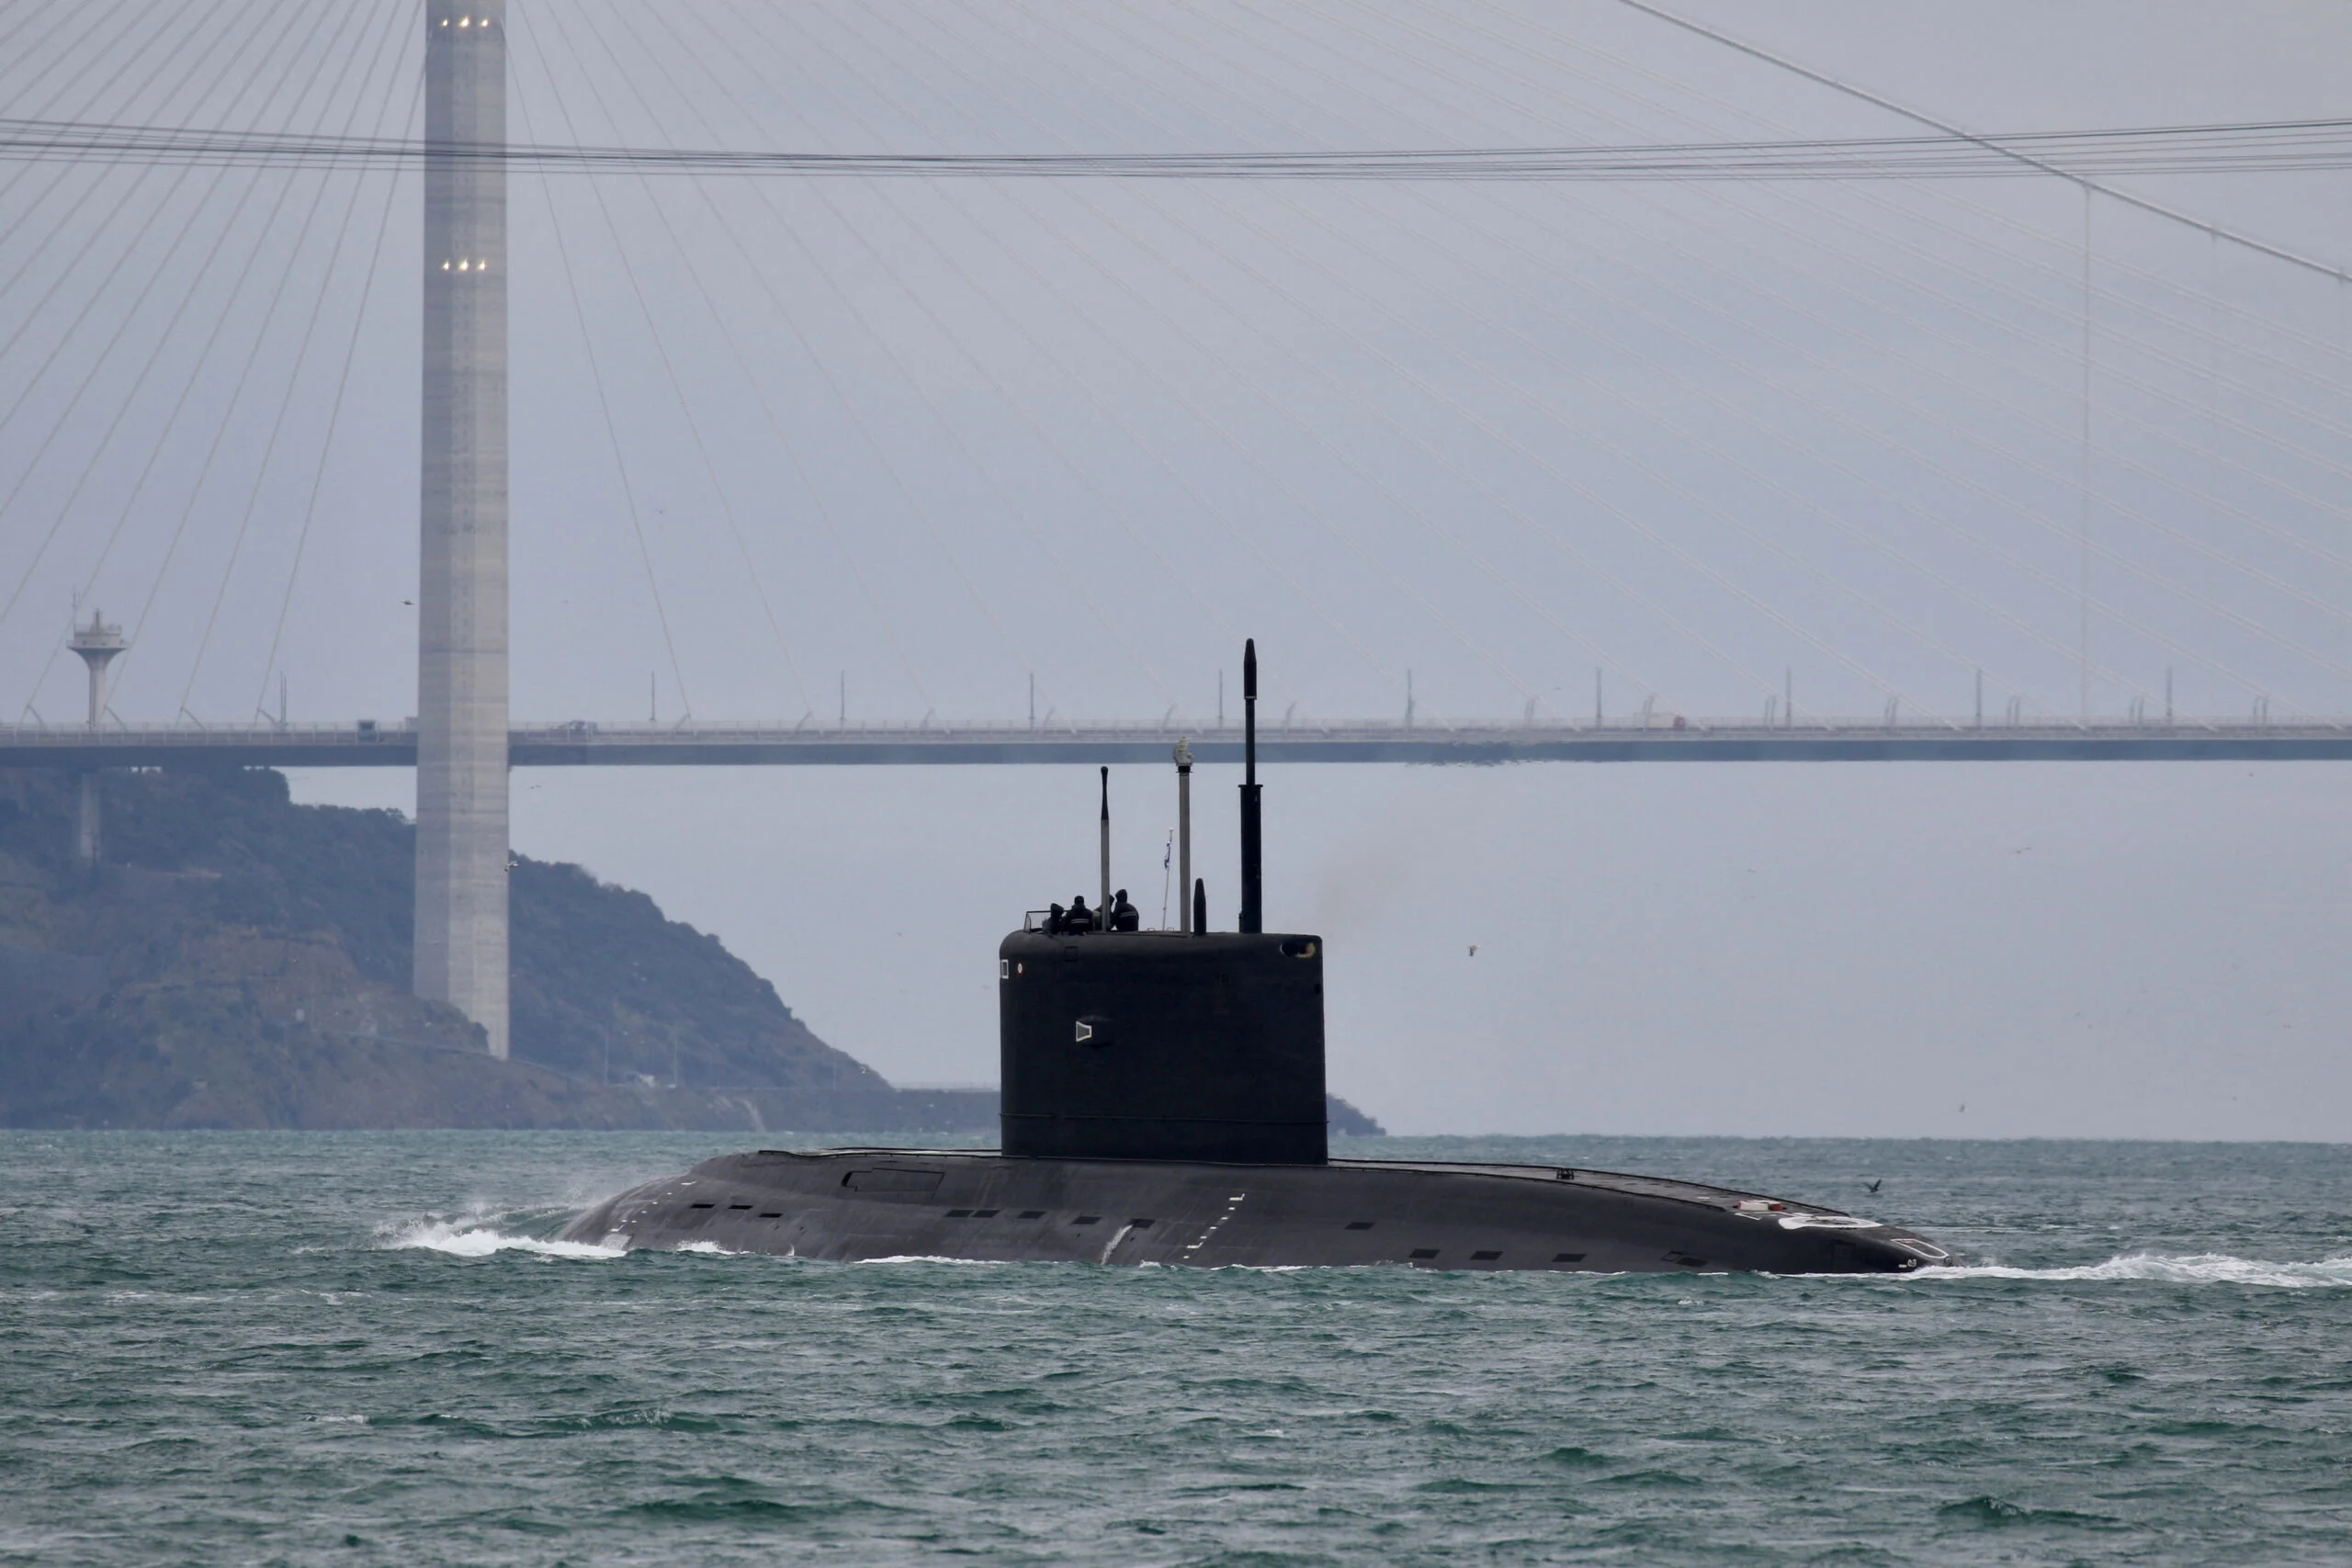 Russian Navy's Diesel Electric Submarine Rostov On Don Sets Sail In Istanbul's Bosphorus